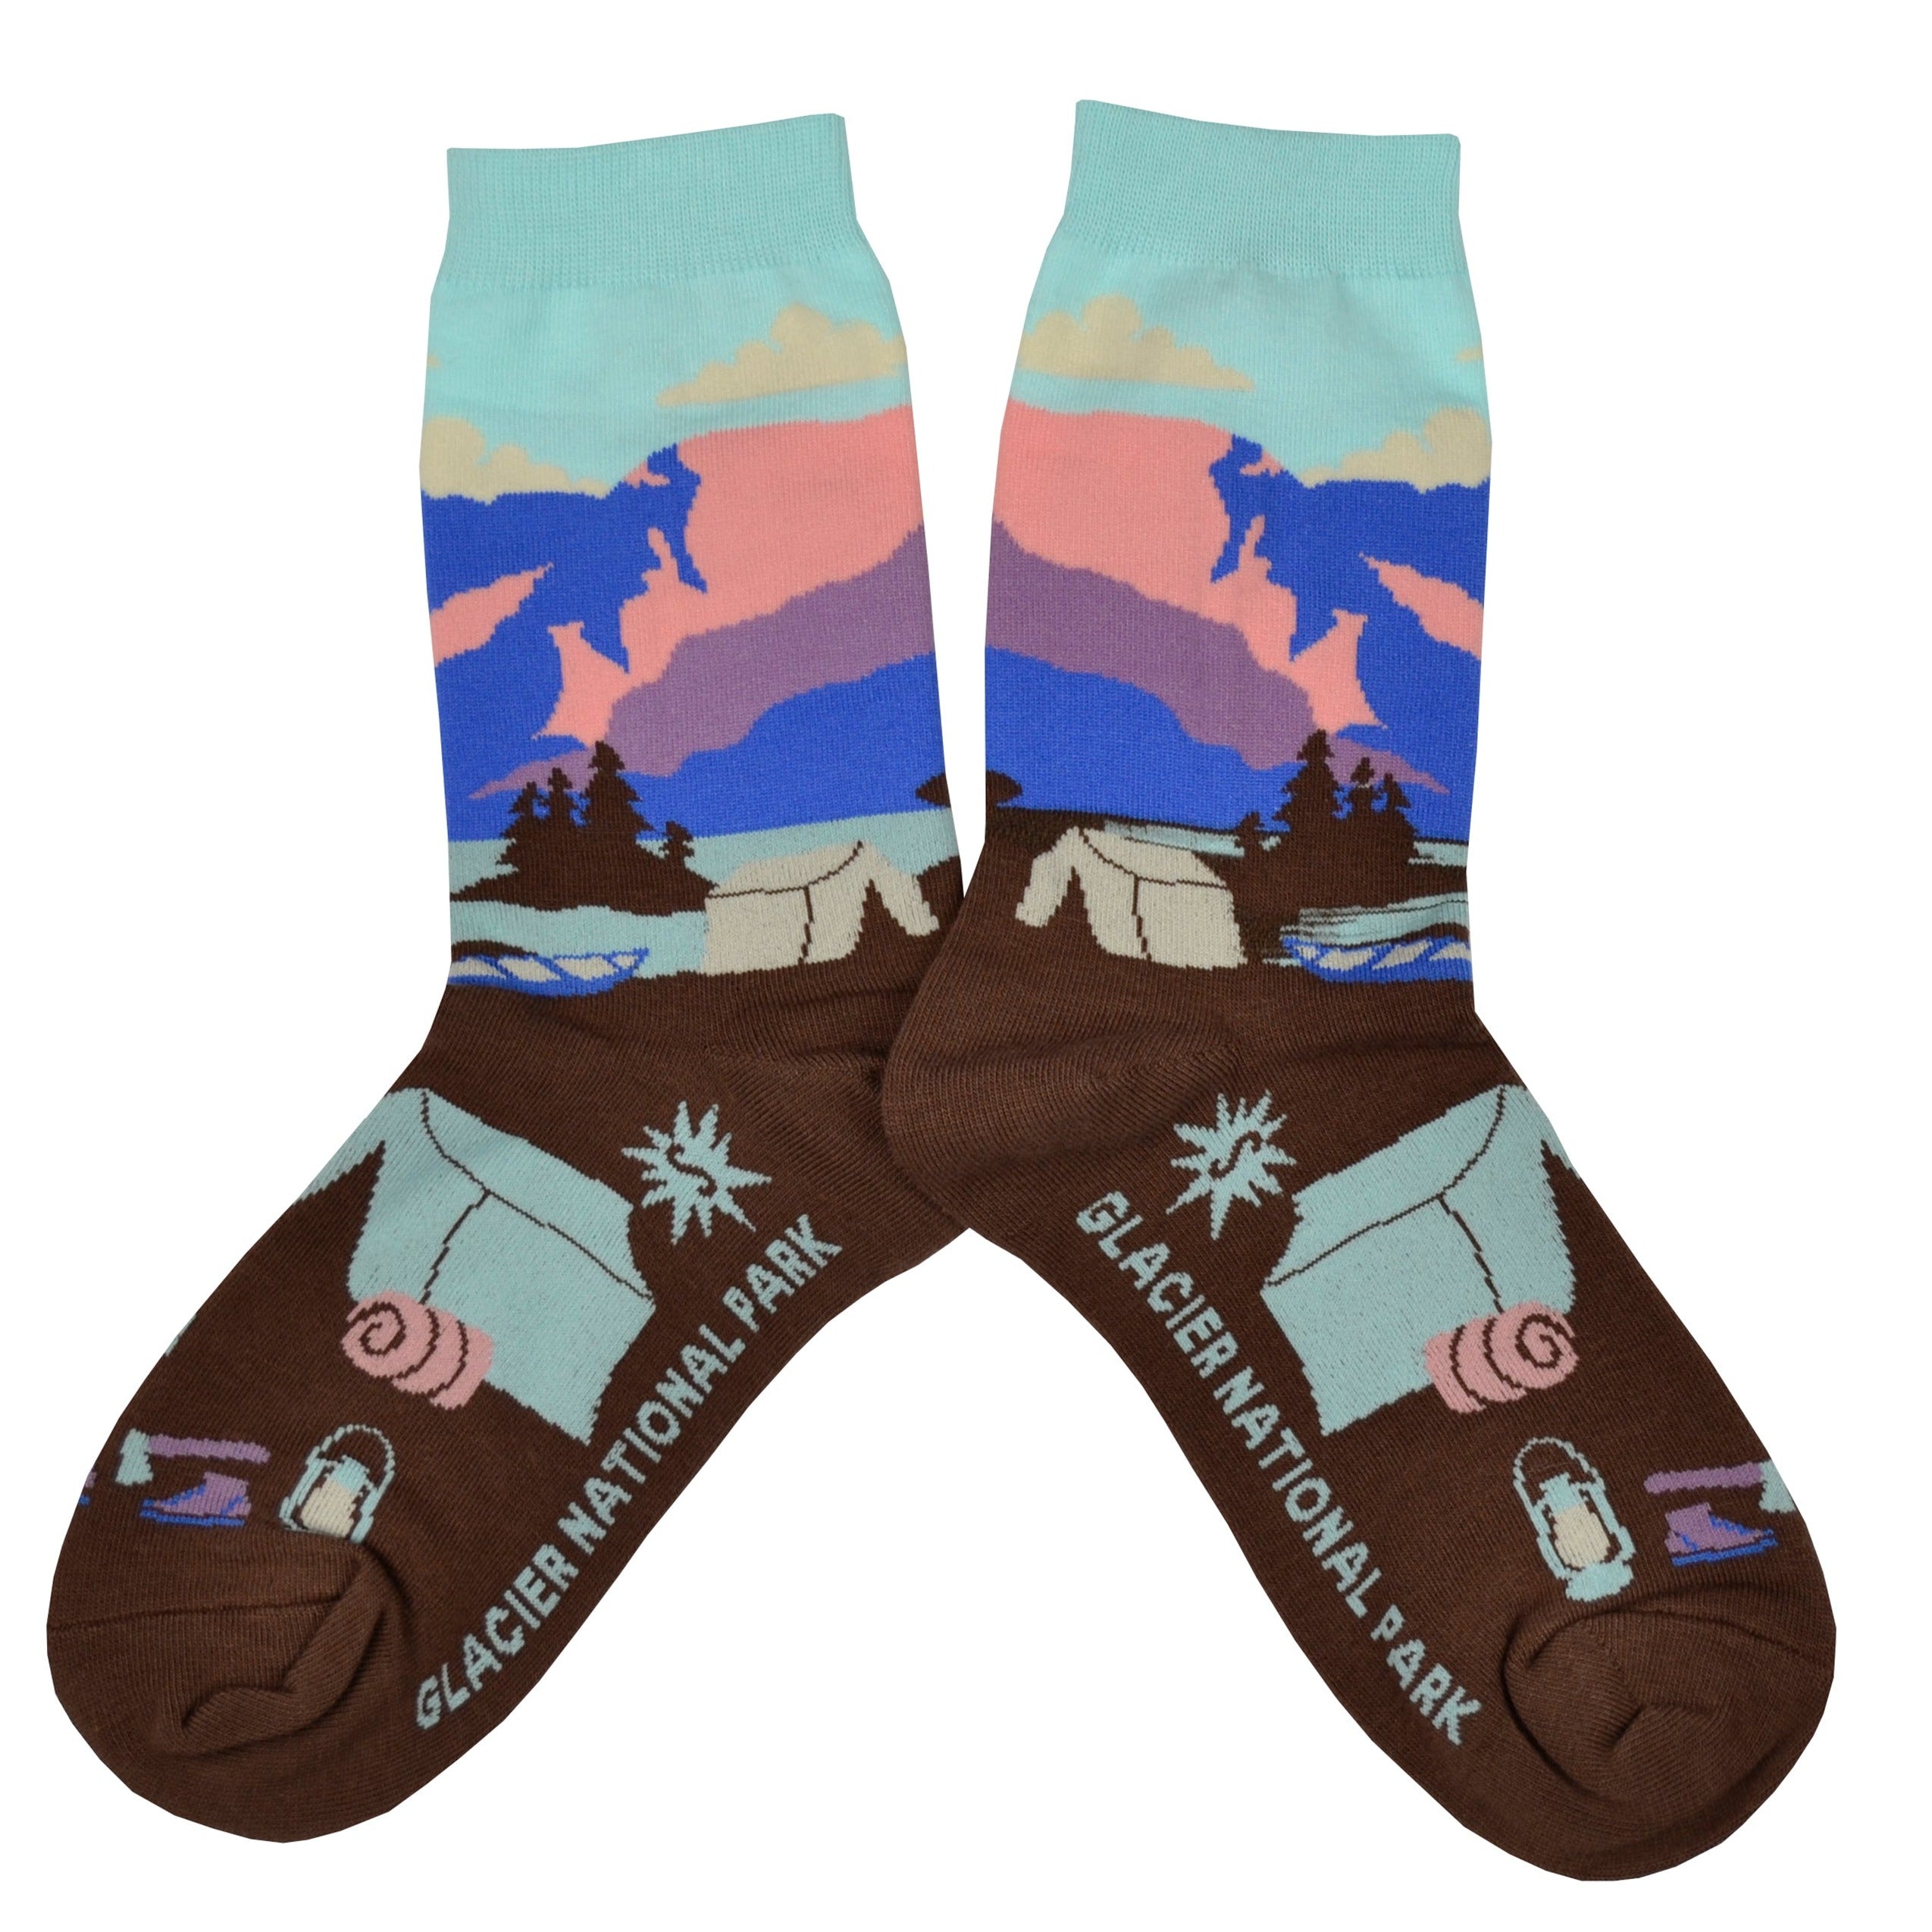 Shown in a flatlay, a pair of women's Sock it to Me cotton crew socks with a sea foam green cuff and a brown heel and toe. These socks feature a depiction of Montana's Glacier National Park with a sea foam green, pink, and blue leg with brown trees and a brown foot with a camping scene.